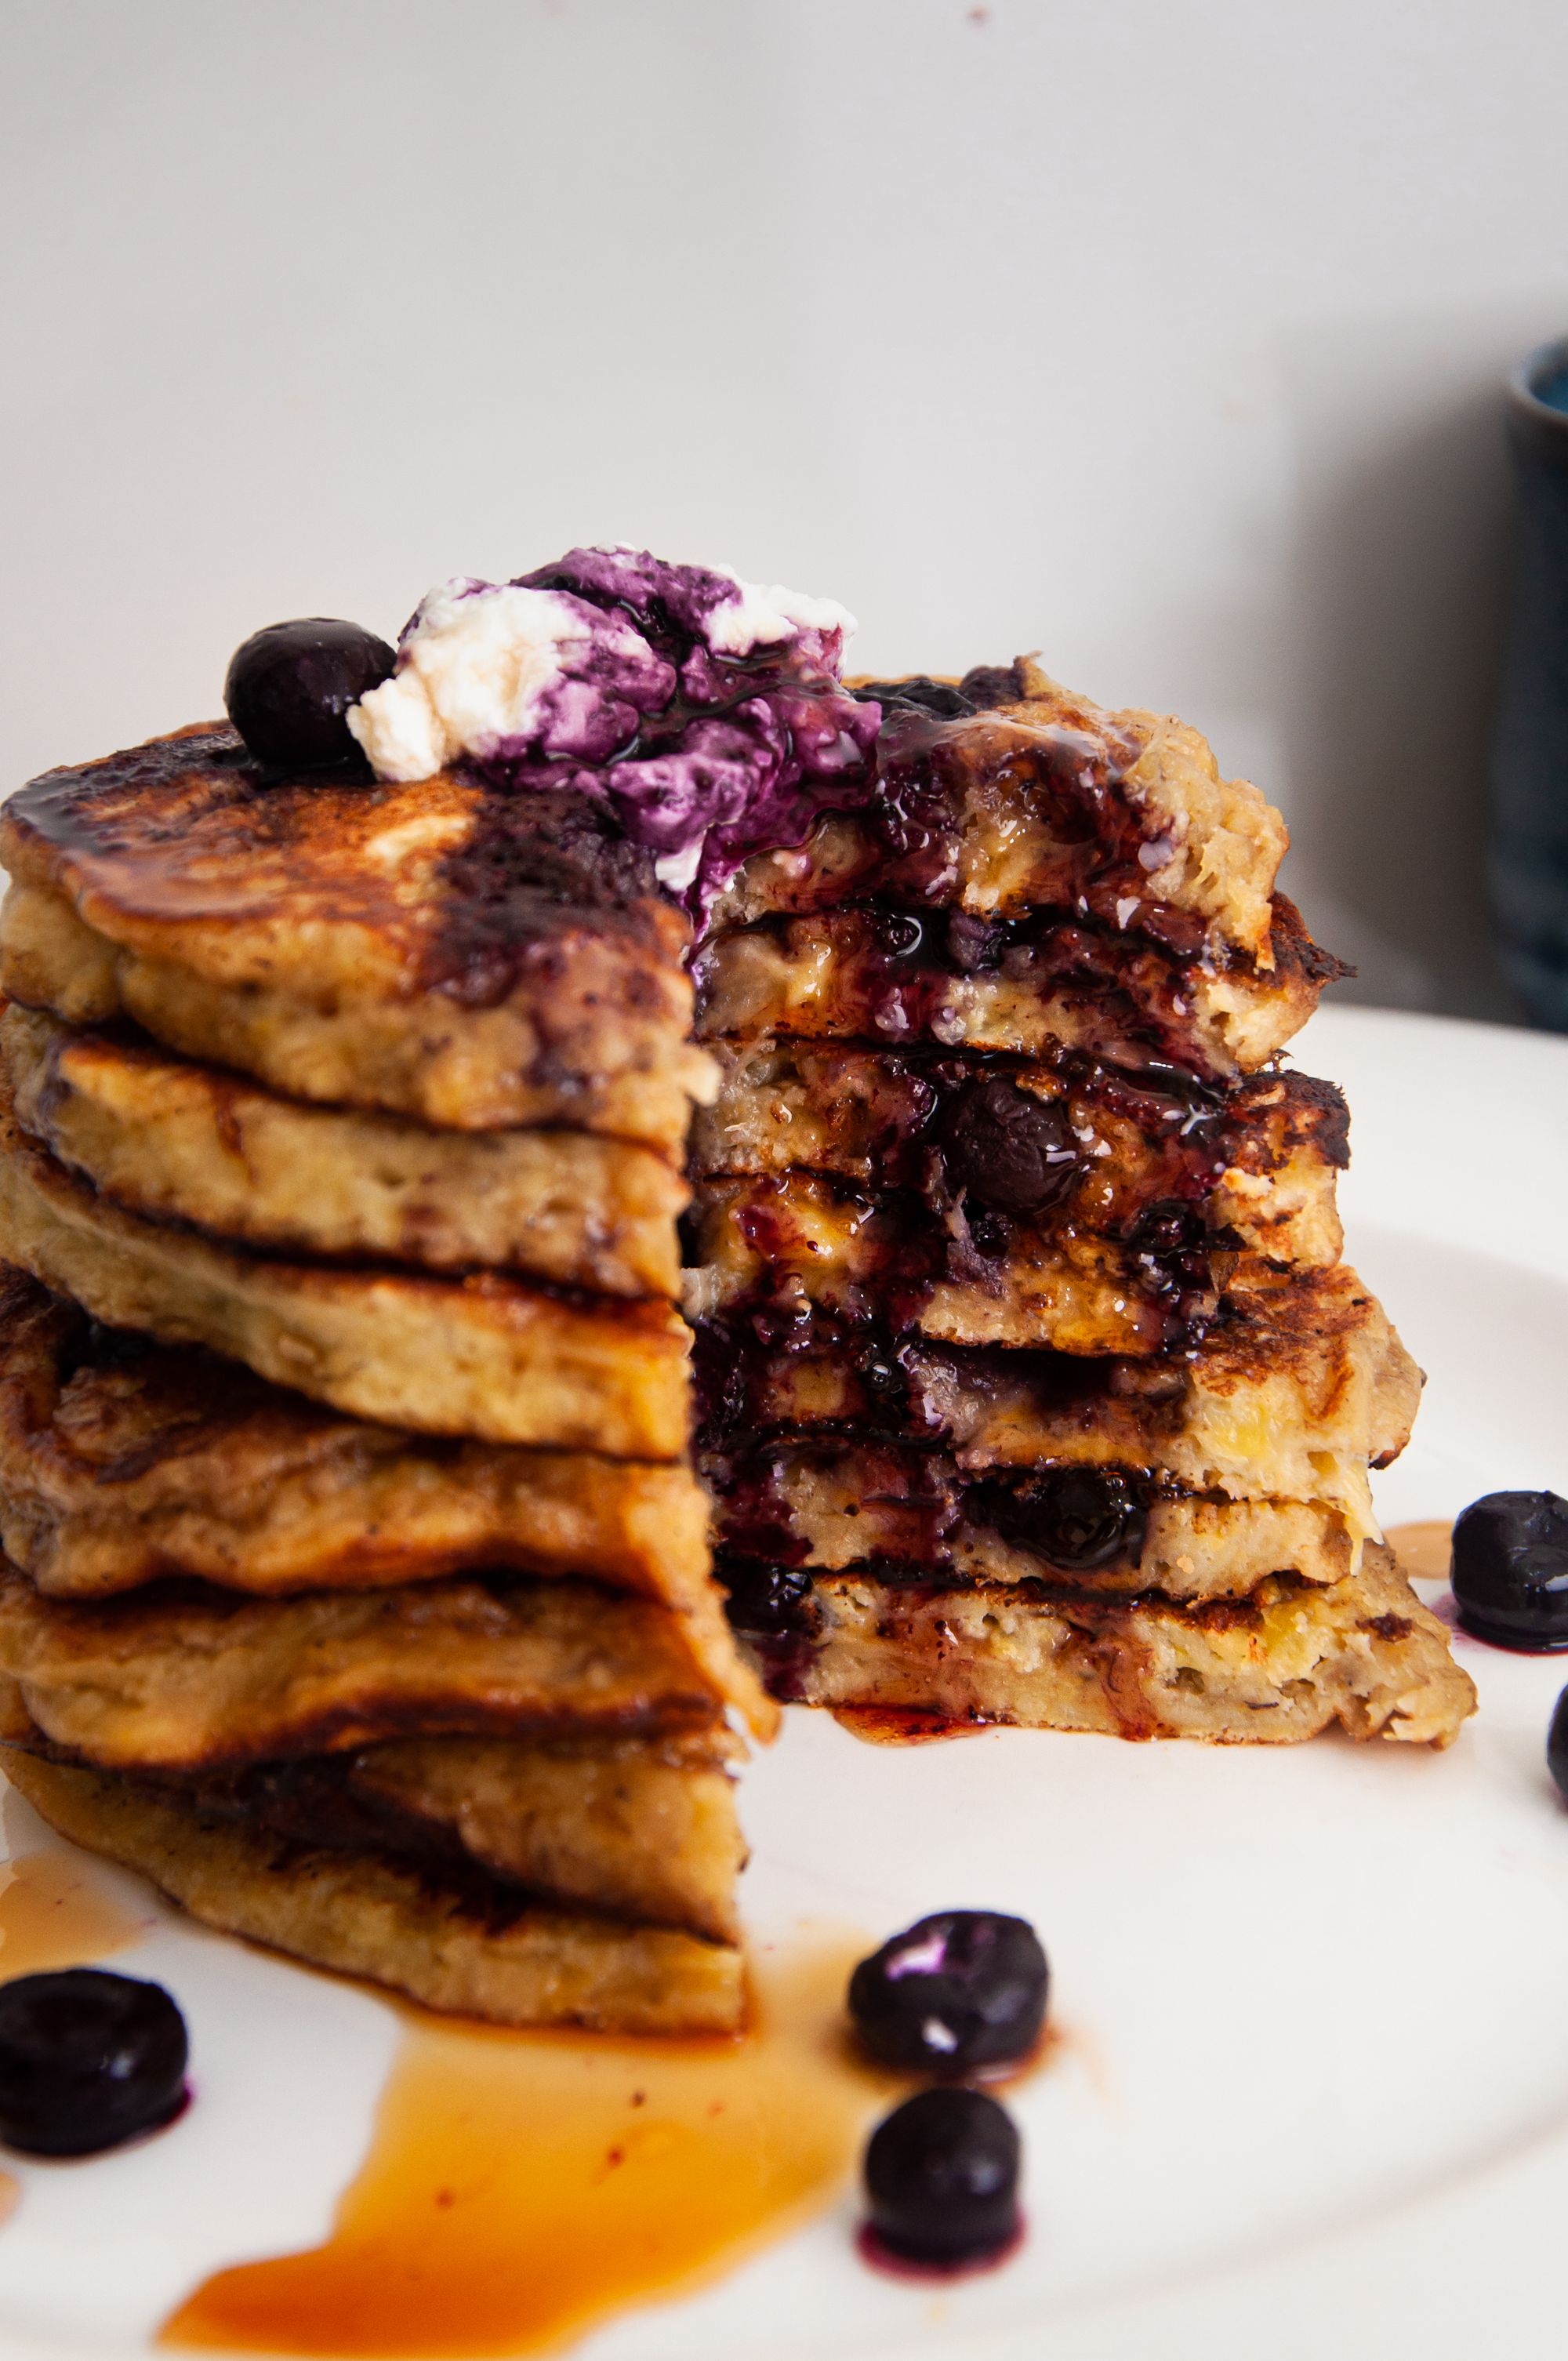 A closer look at Banana and Blueberry Pancakes